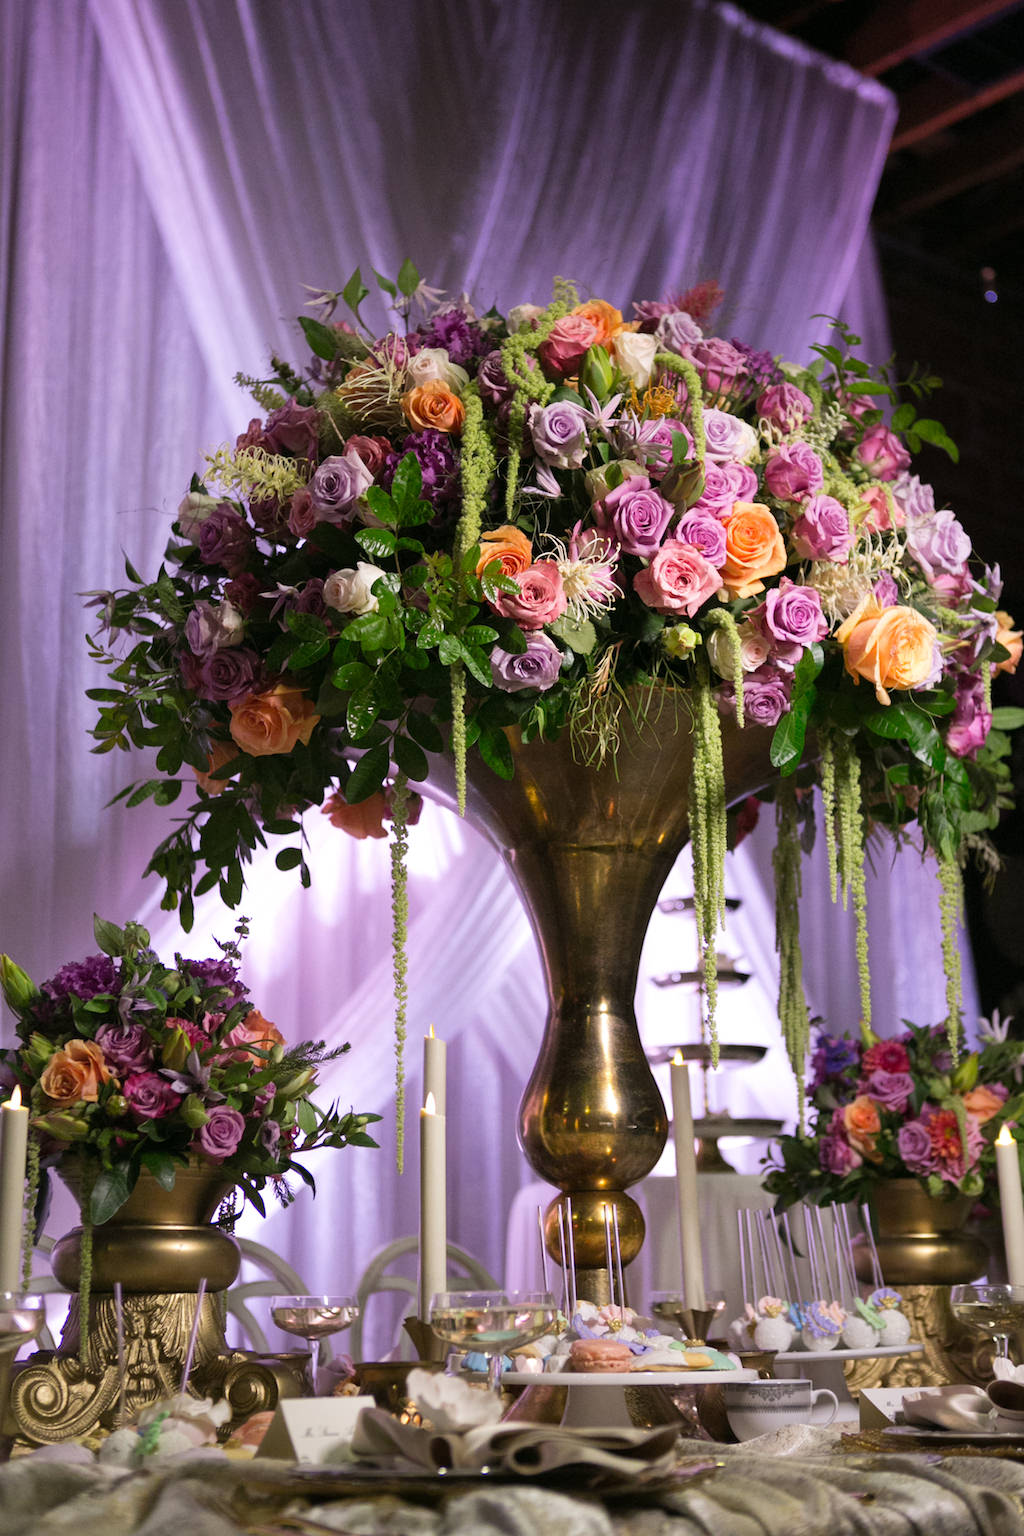 Tall Wedding Reception Centerpiece with Pink, Orange, and Purple Roses with Tropical Greenery